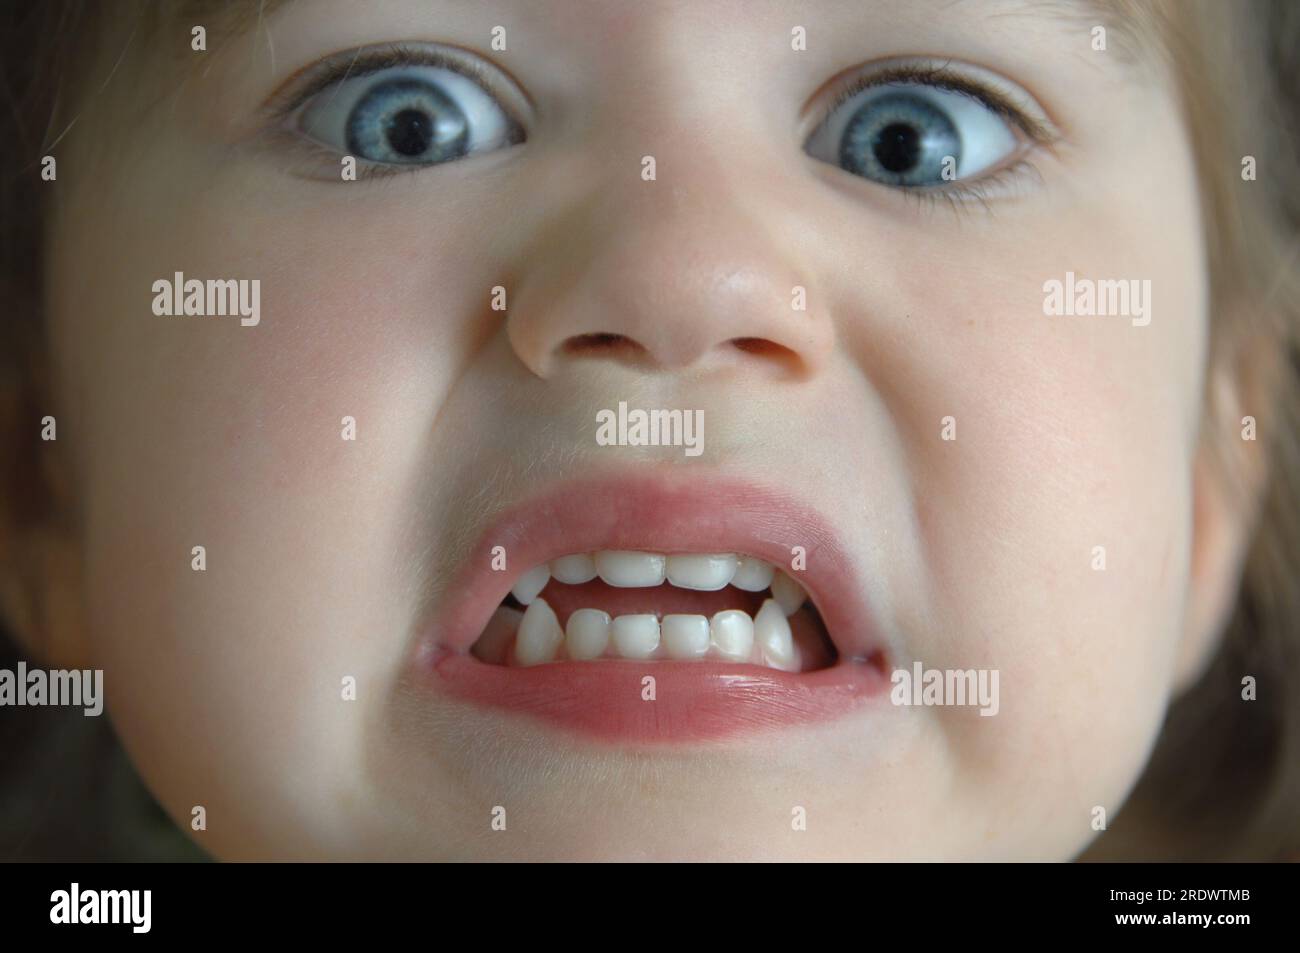 Extreme closeup of little girl's face shows her terrified expression.  Her eyes are bulging and her teeth are gritted. Stock Photo